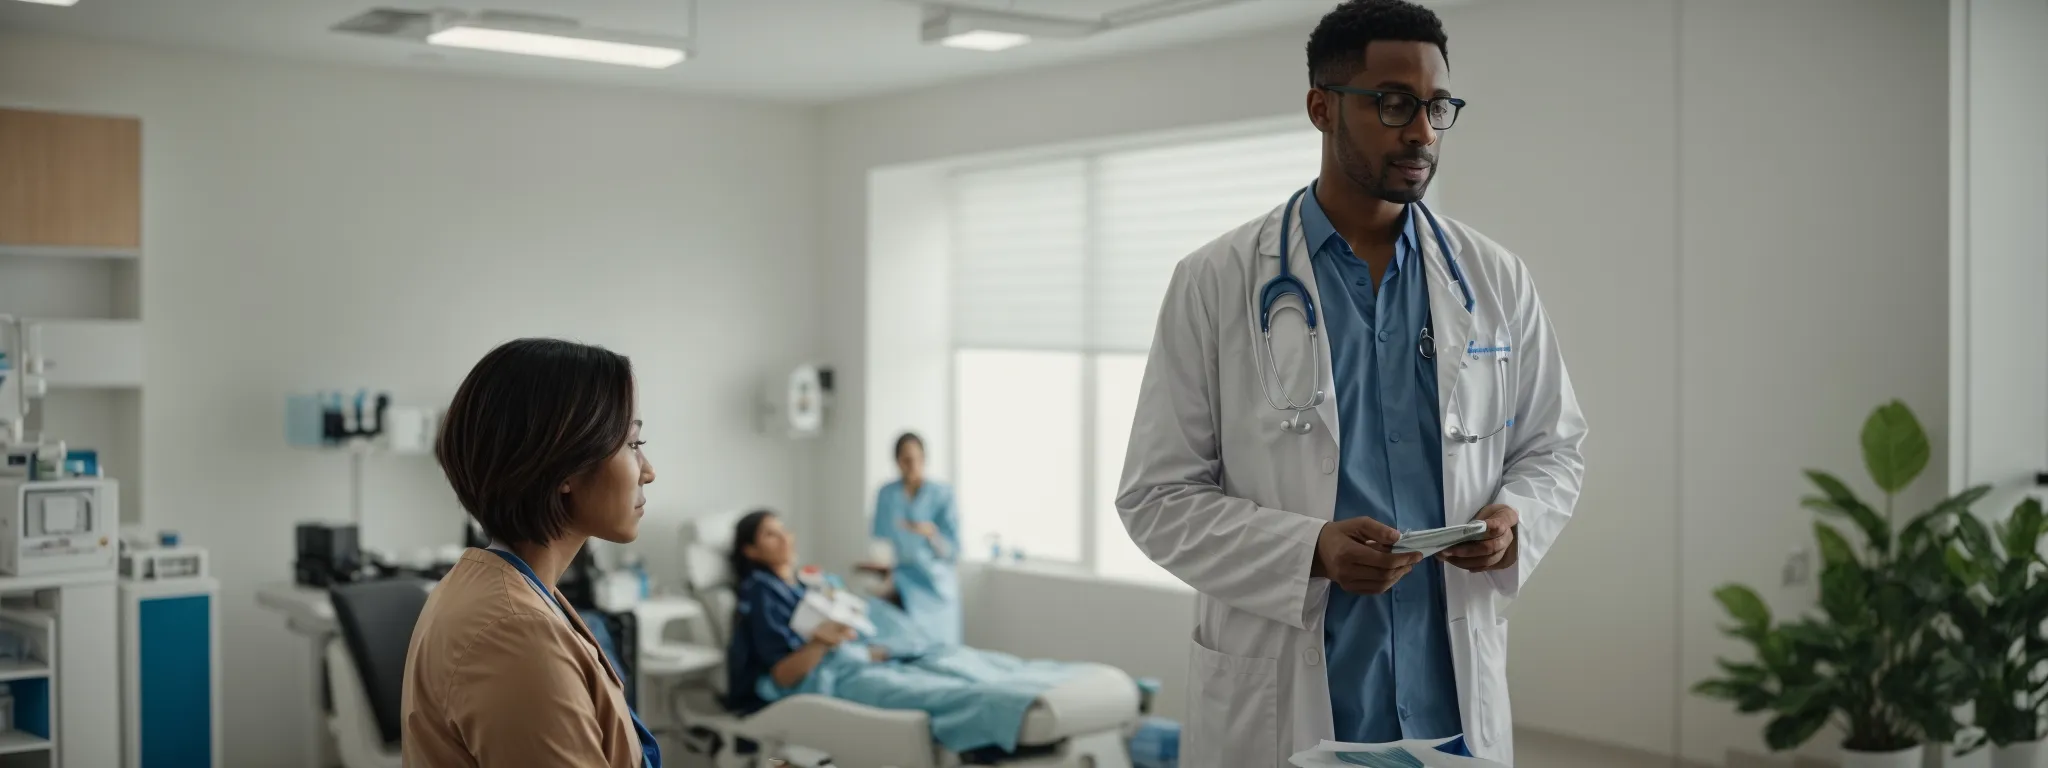 a doctor converses with a patient in a bright, modern clinic, symbolizing a successful pcp-patient relationship at the heart of healthcare marketing.